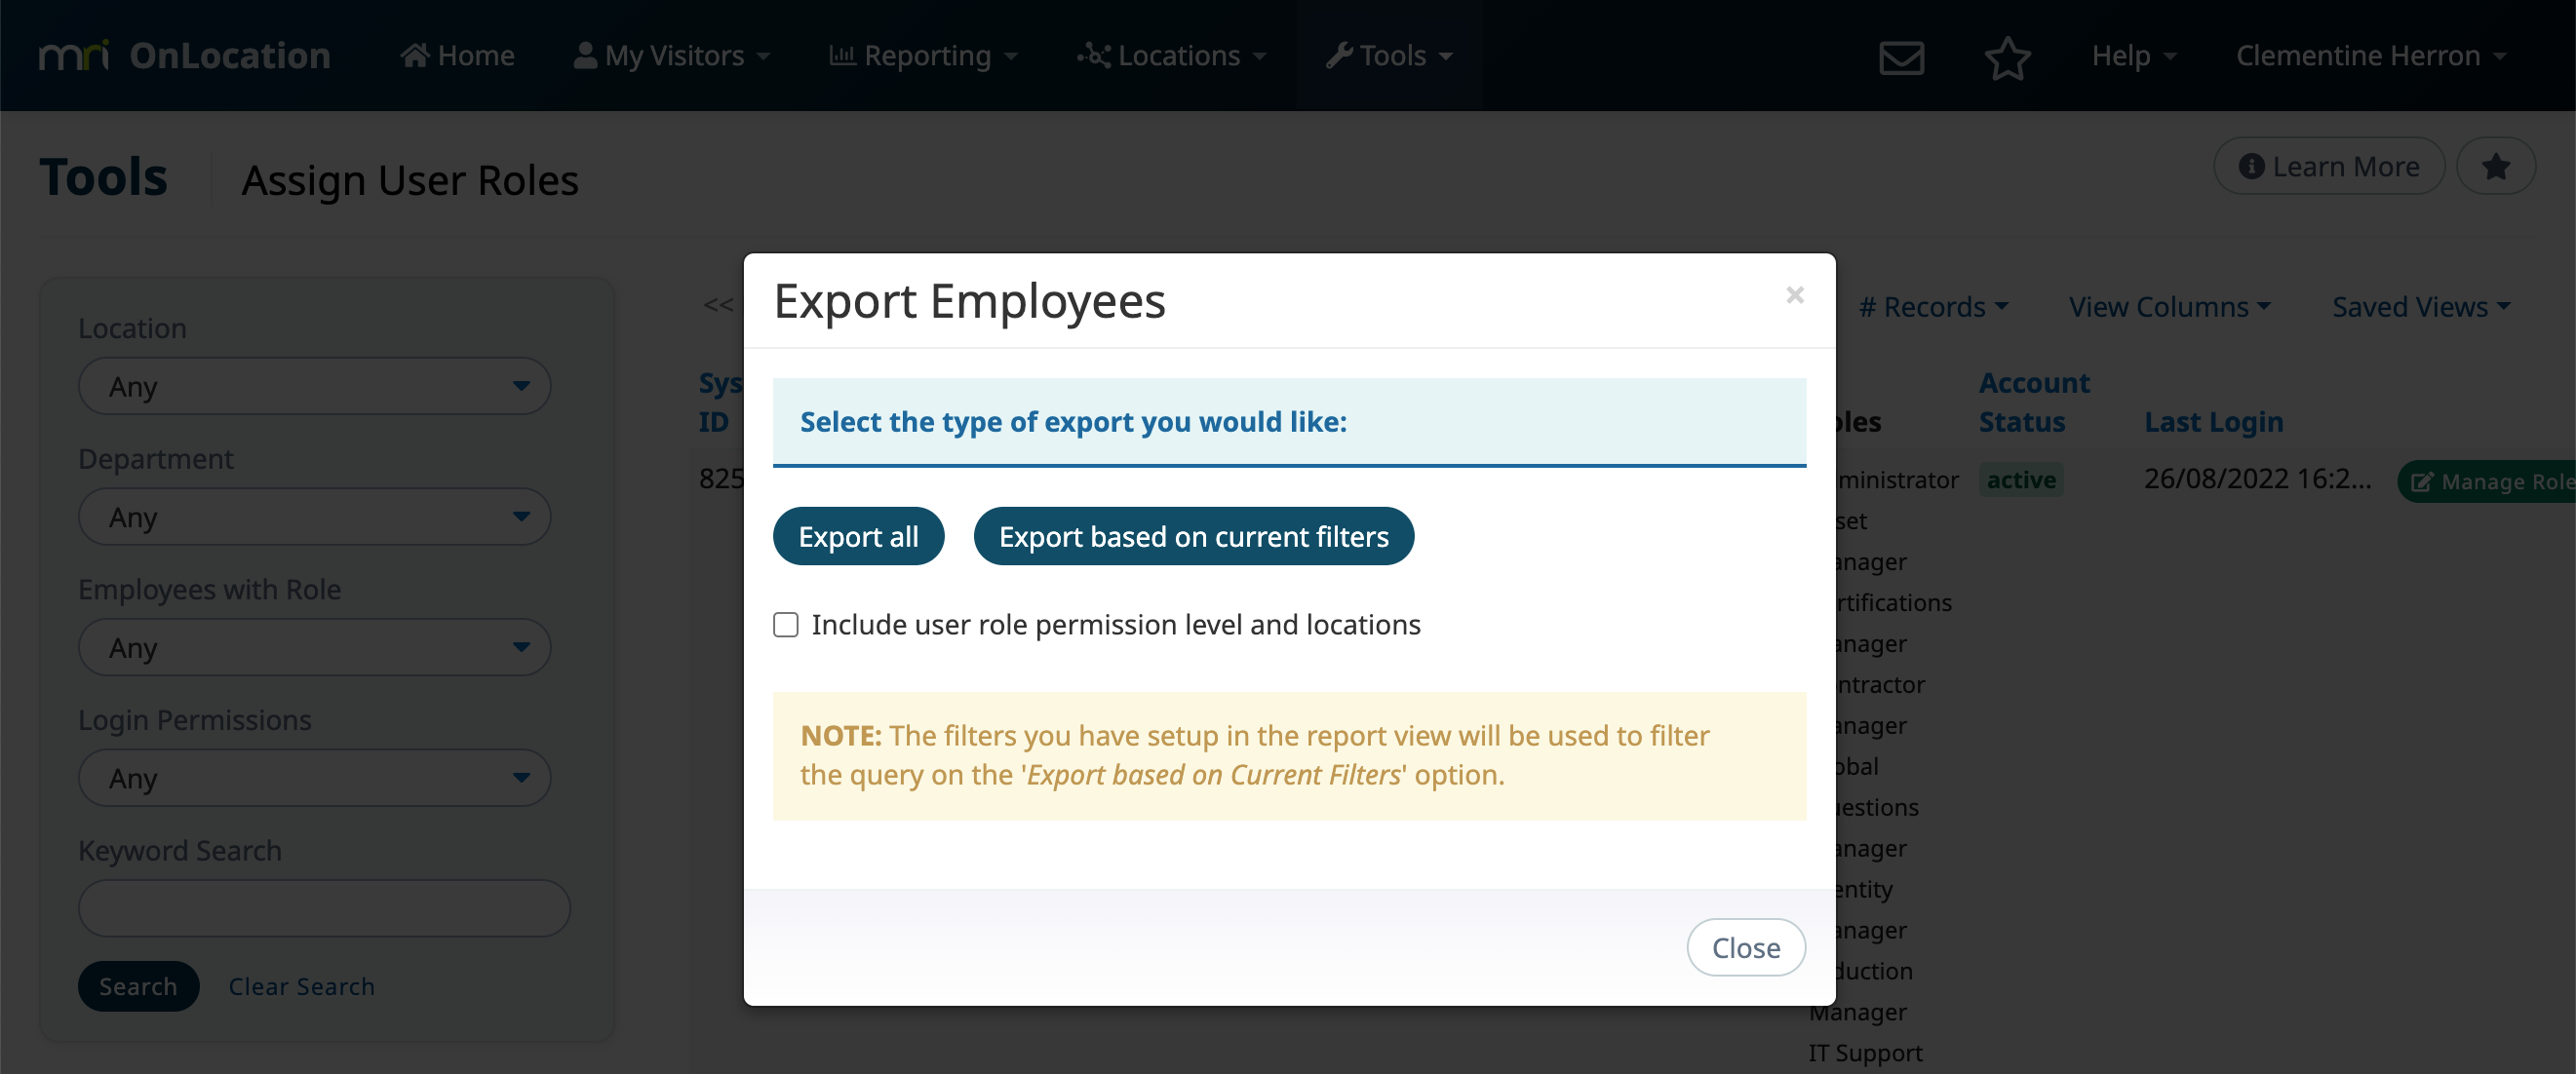 export-employees-pop-up.png